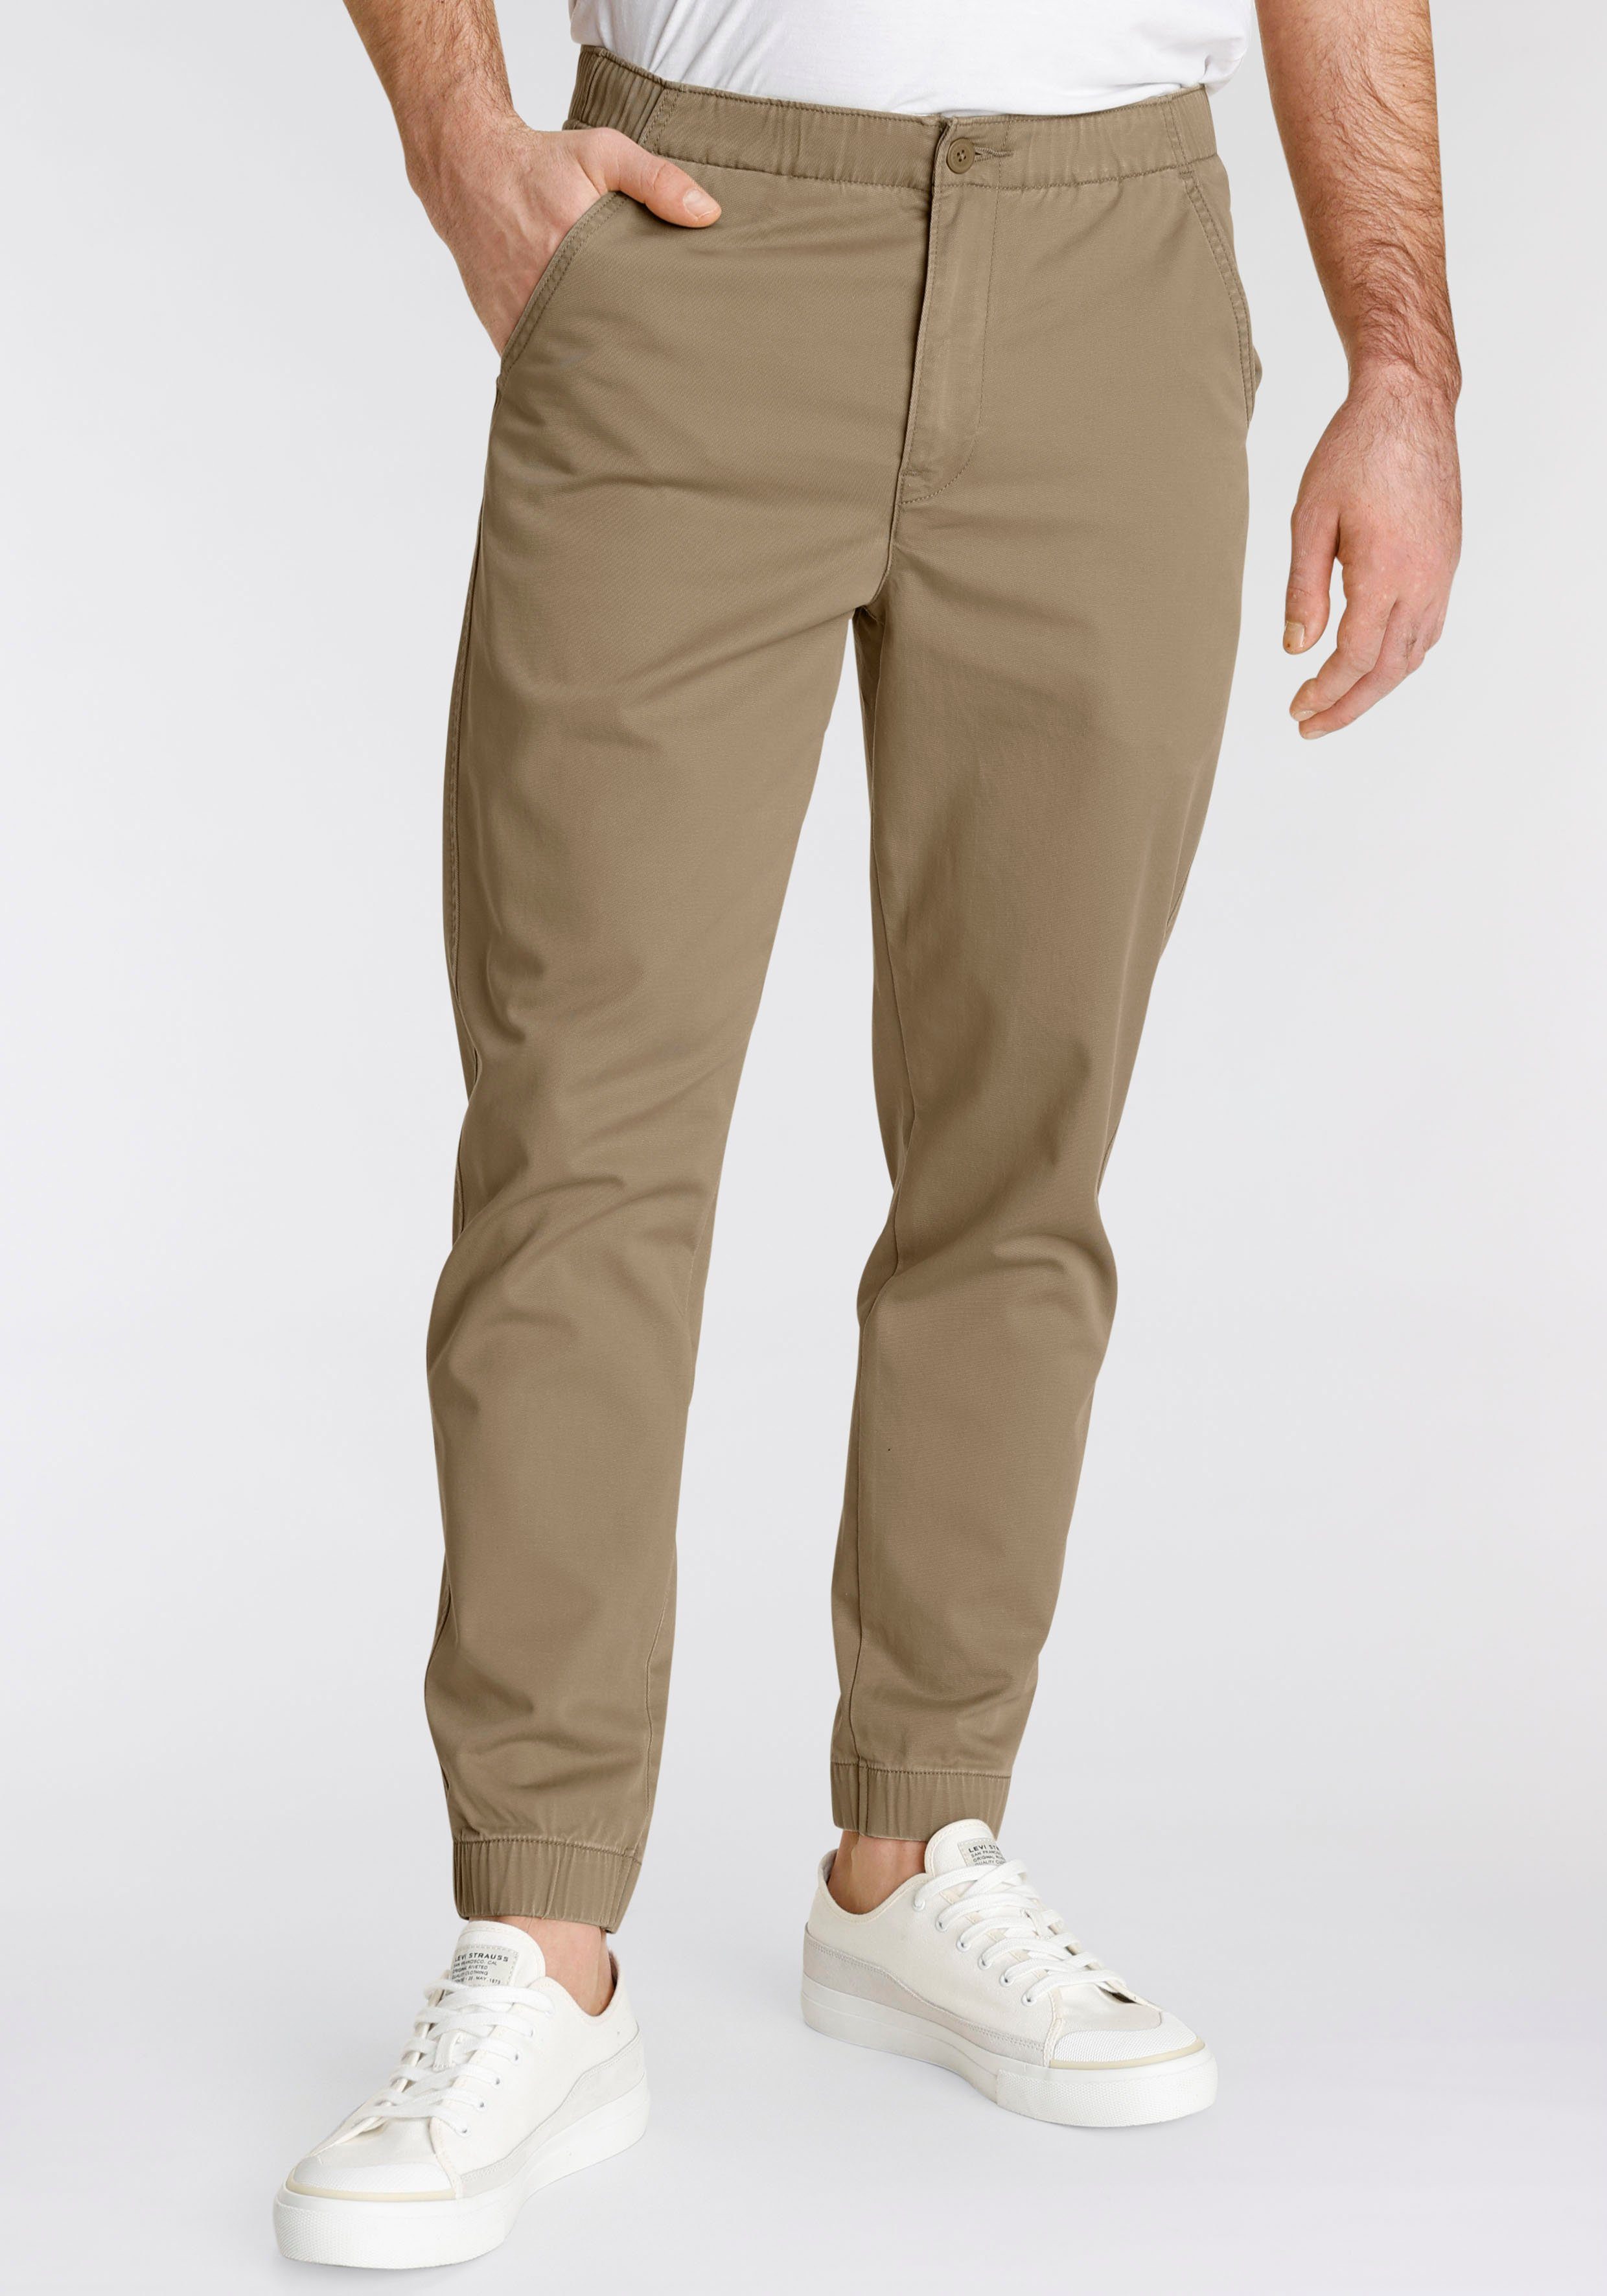 Levi's® Chinohose LE XX CHINO JOGGER III in Unifarbe für leichtes Styling